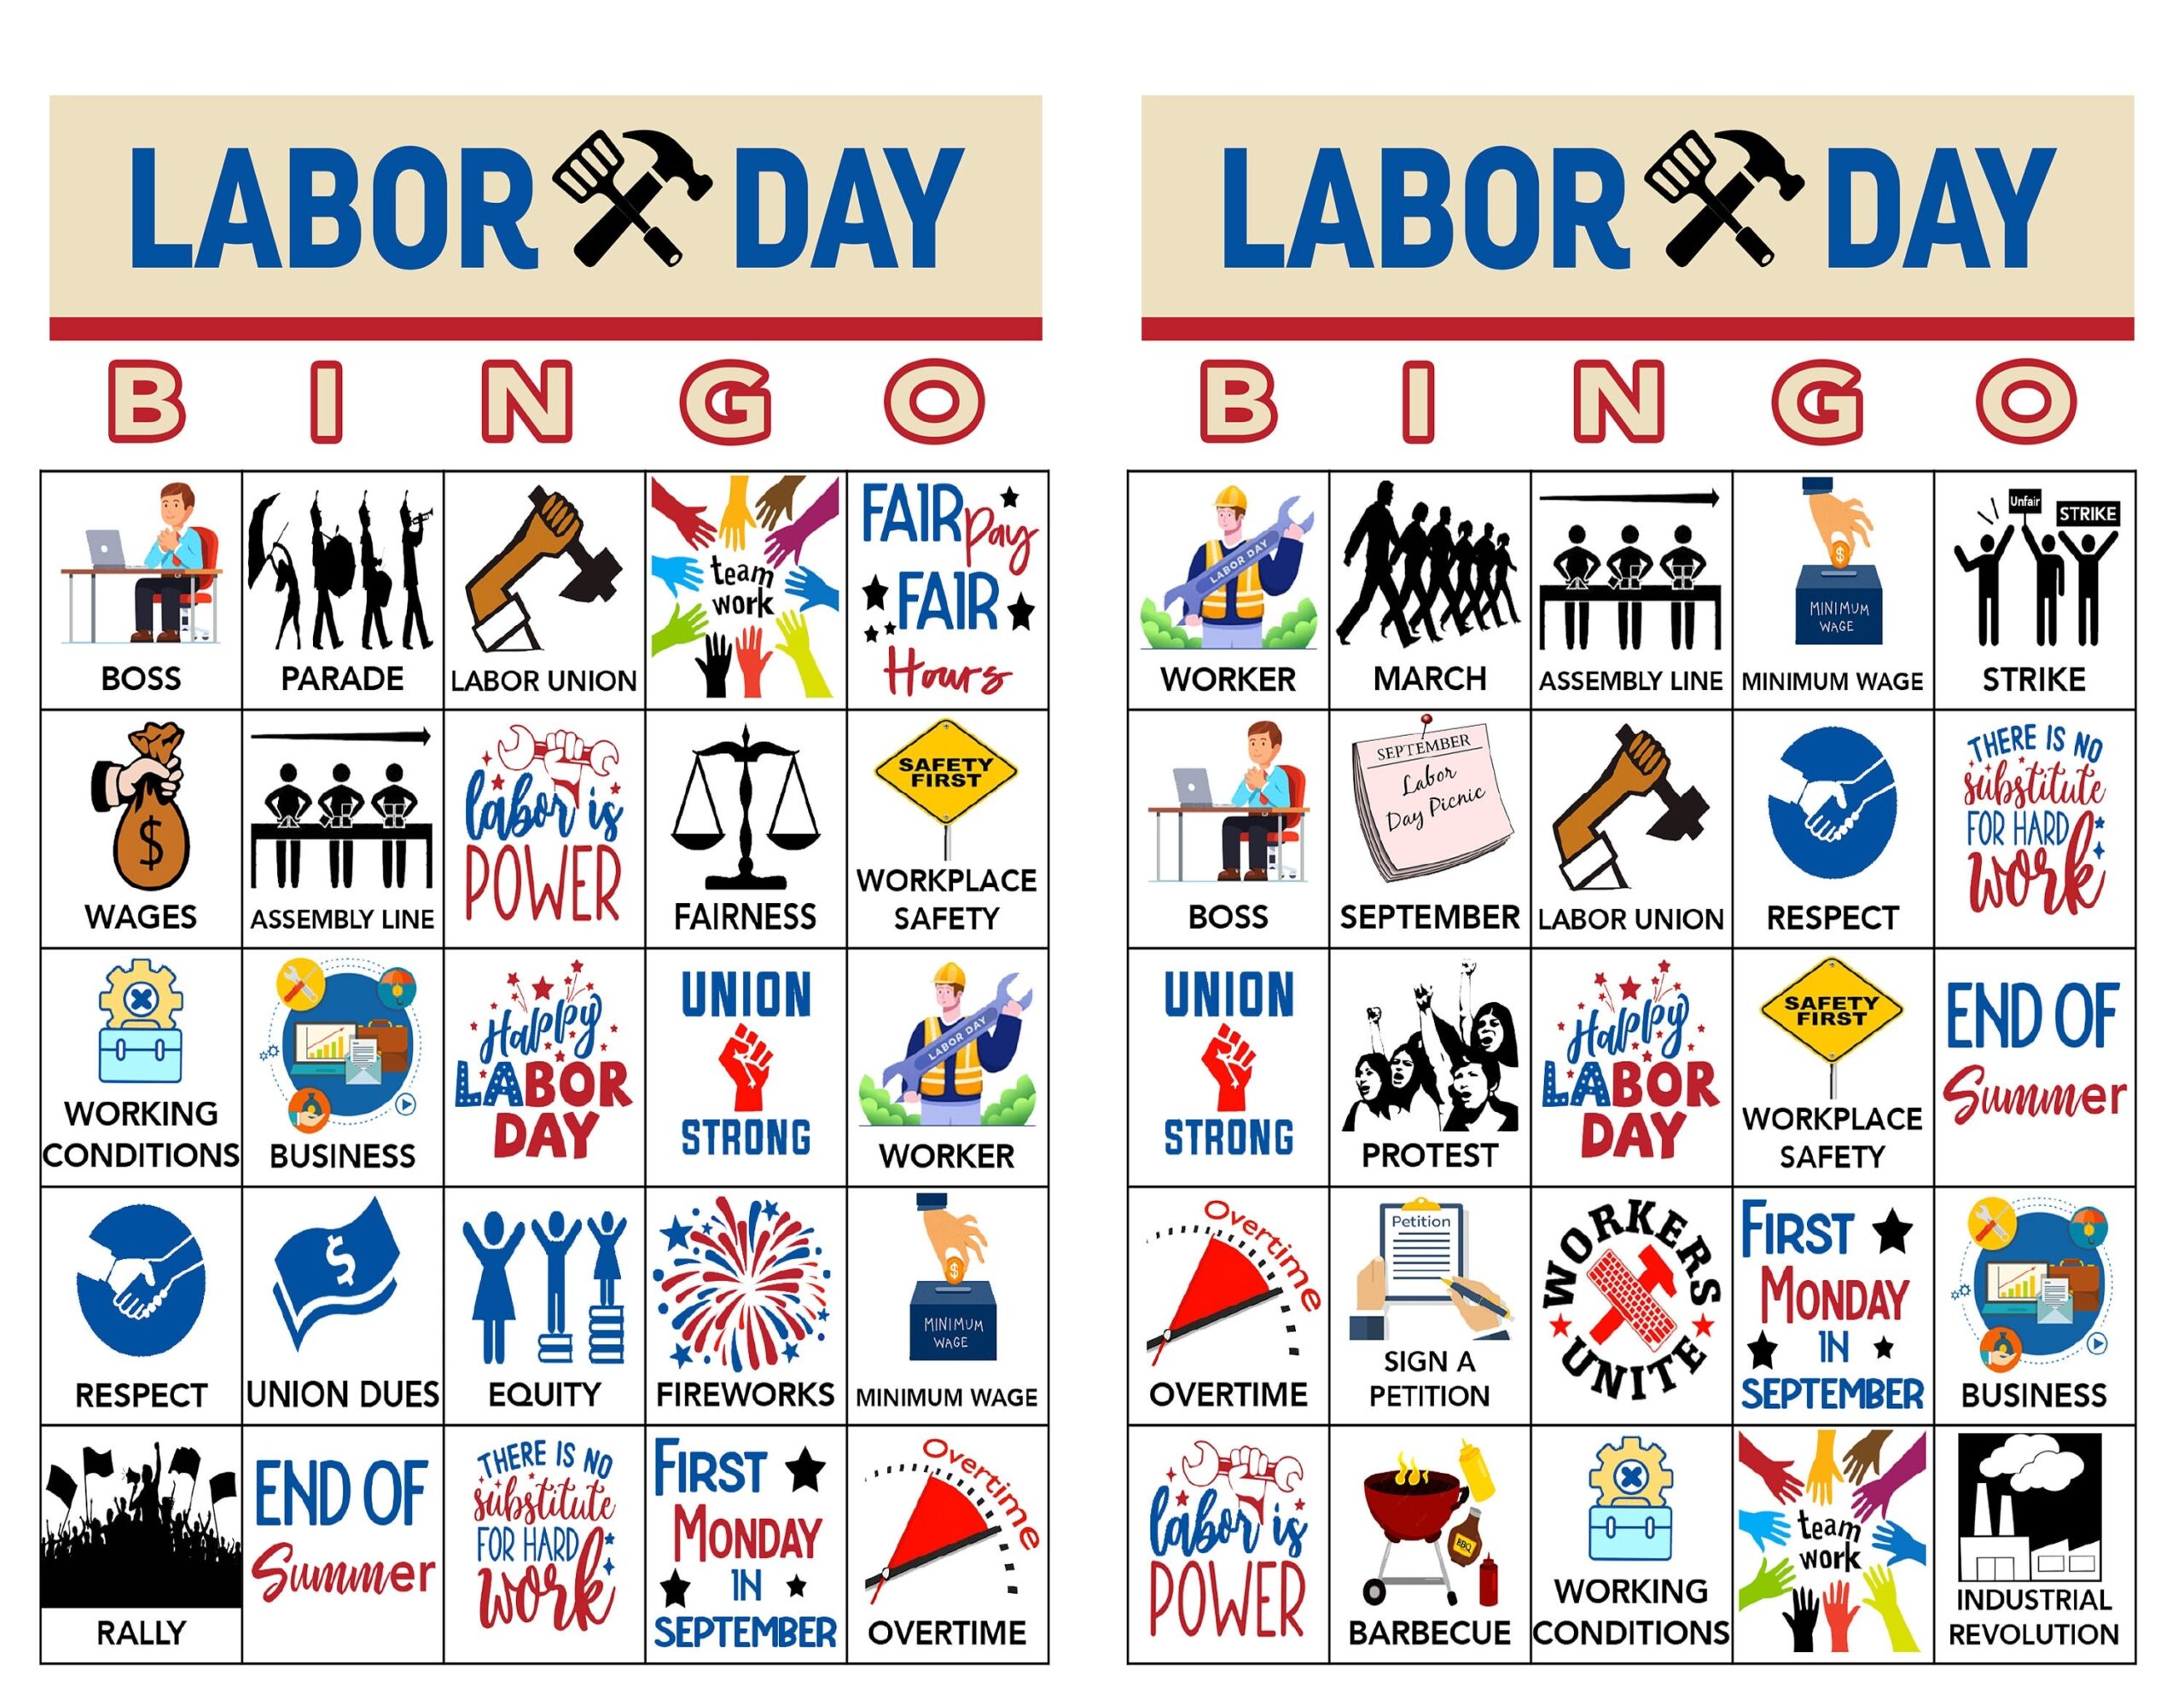 Labor Day Game Party Game Labor Day Bingo Game Labor Day Printable Game Adult Kids Game Instant Download 30 Unique Cards Etsy